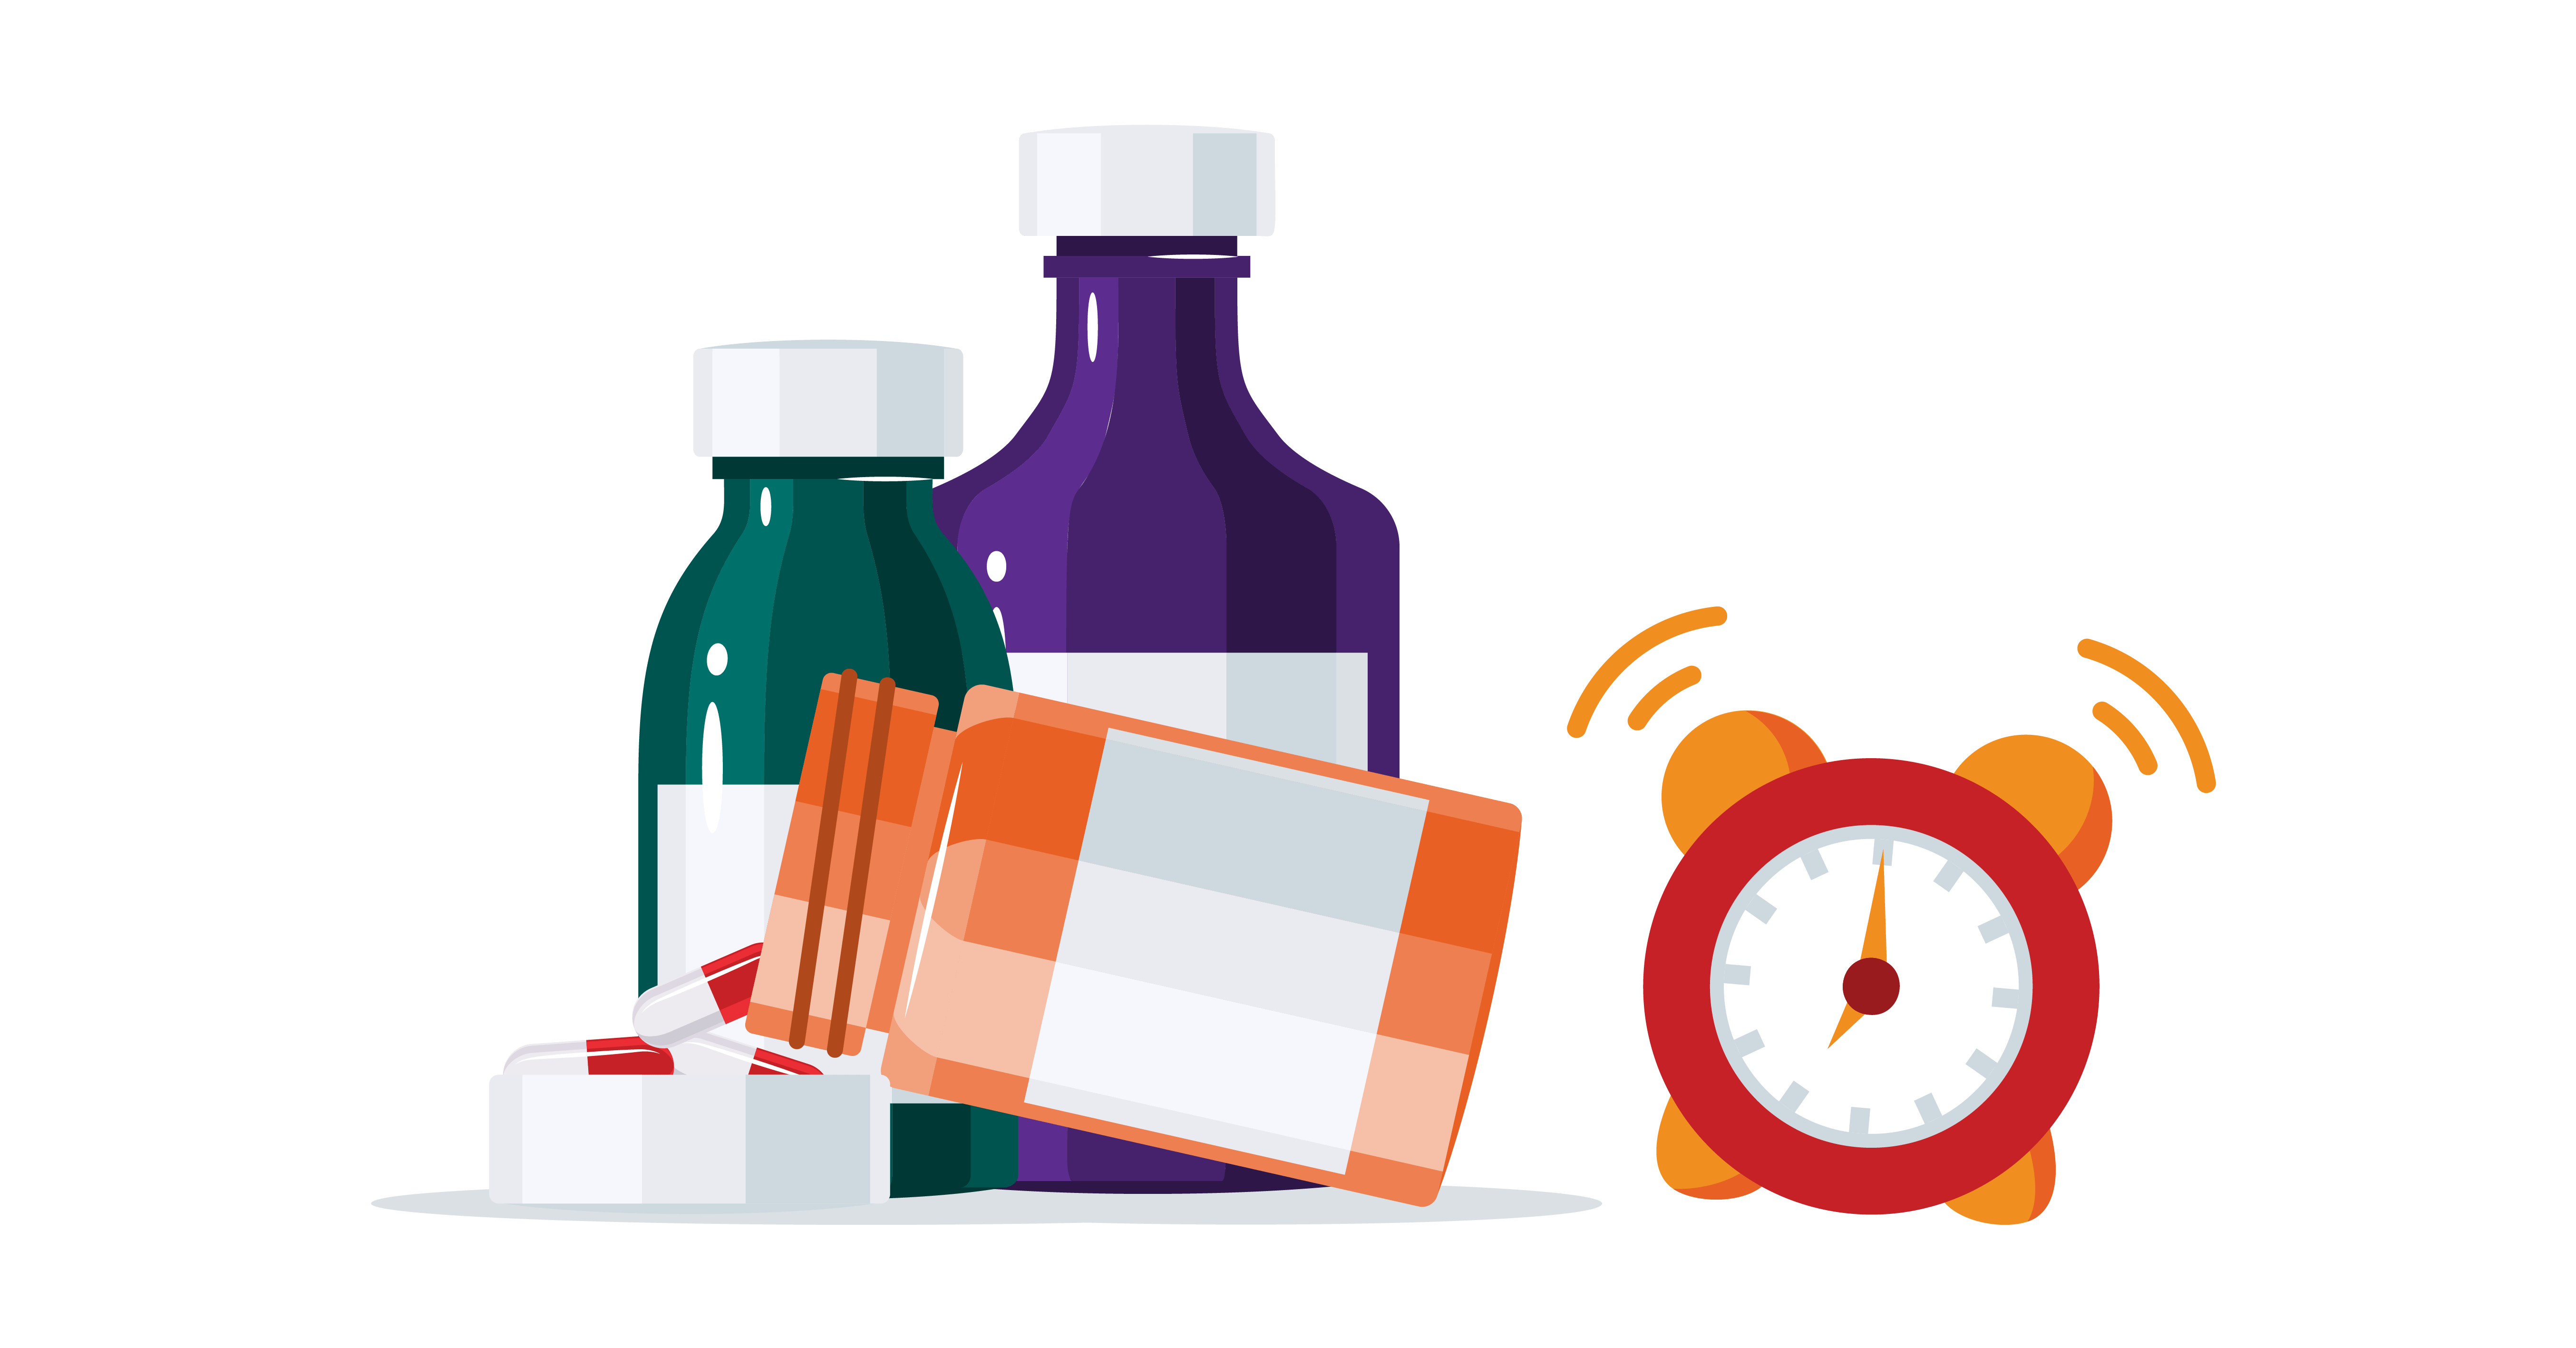 medication bottles and alarm clock icons